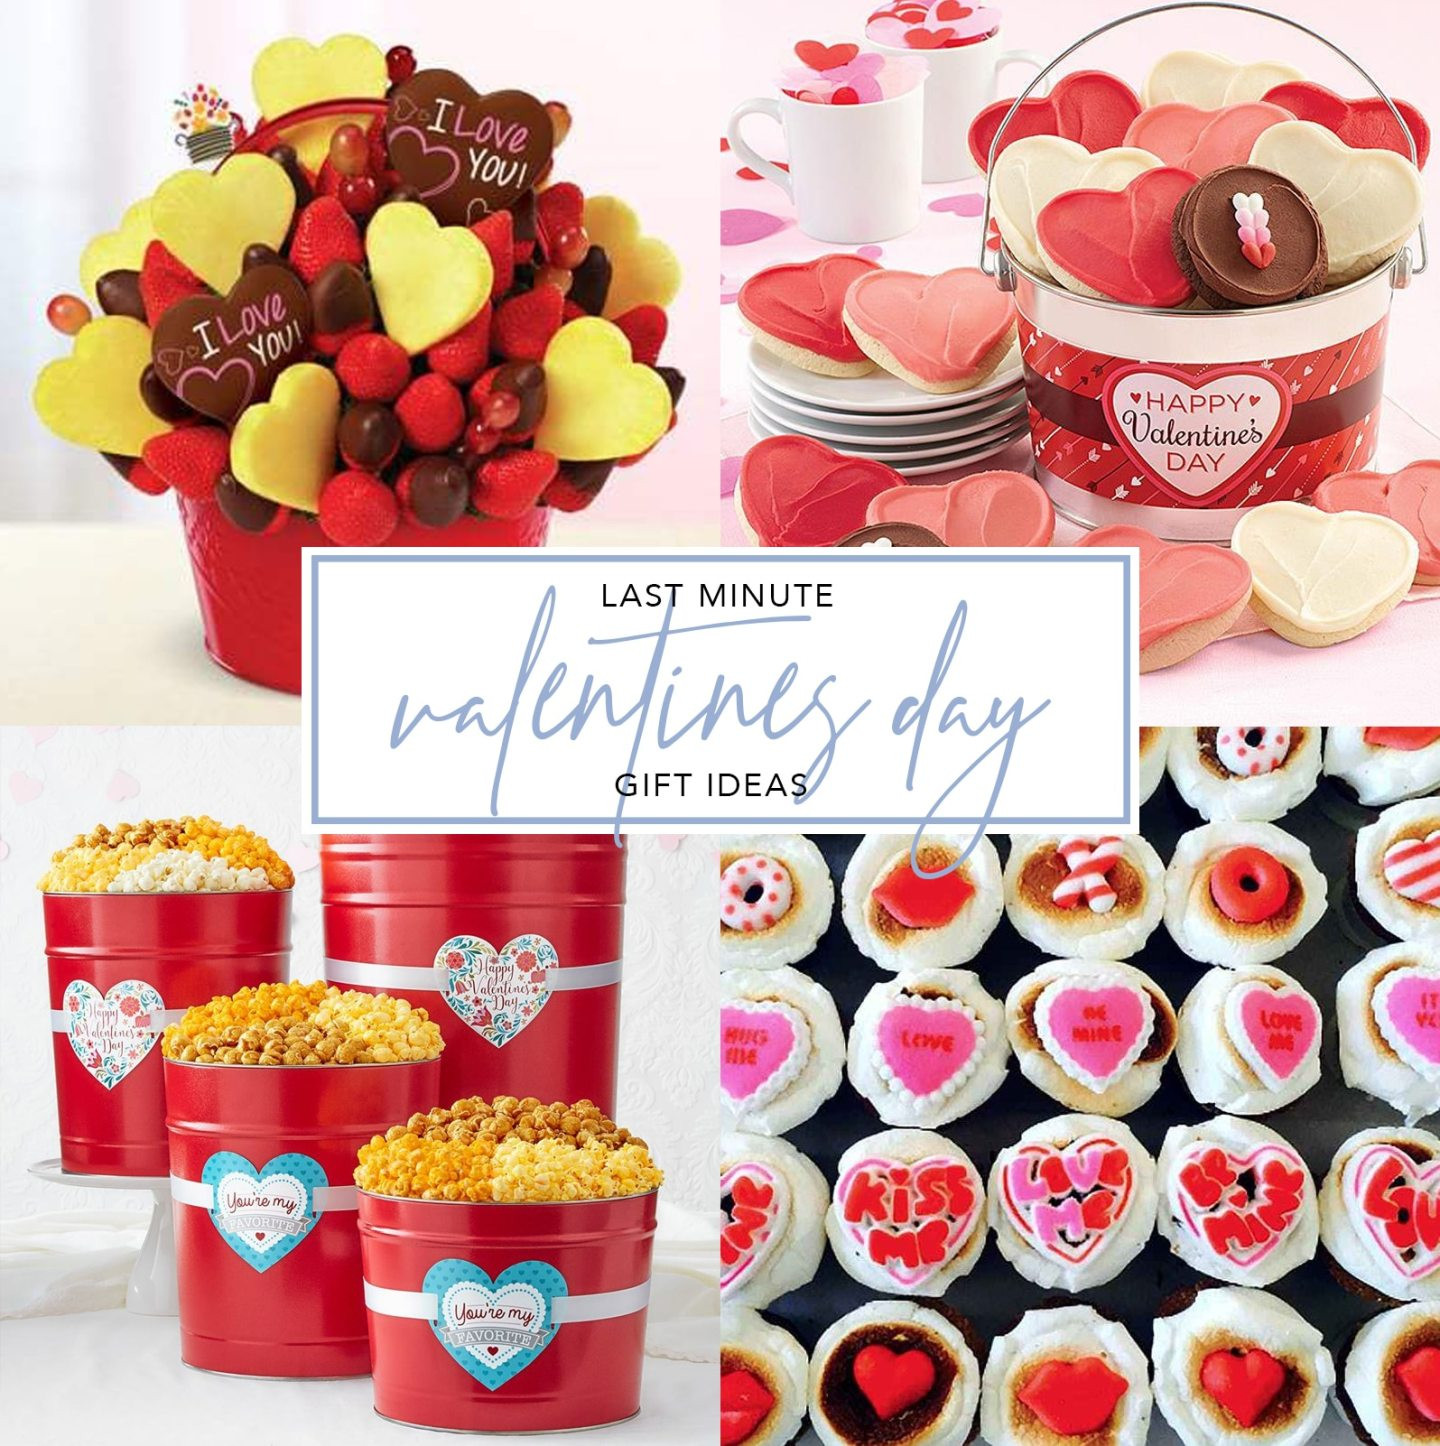 Last Minute Valentines Day Gift Ideas
 Send Some Love Last Minute Valentine s Day Gift Ideas